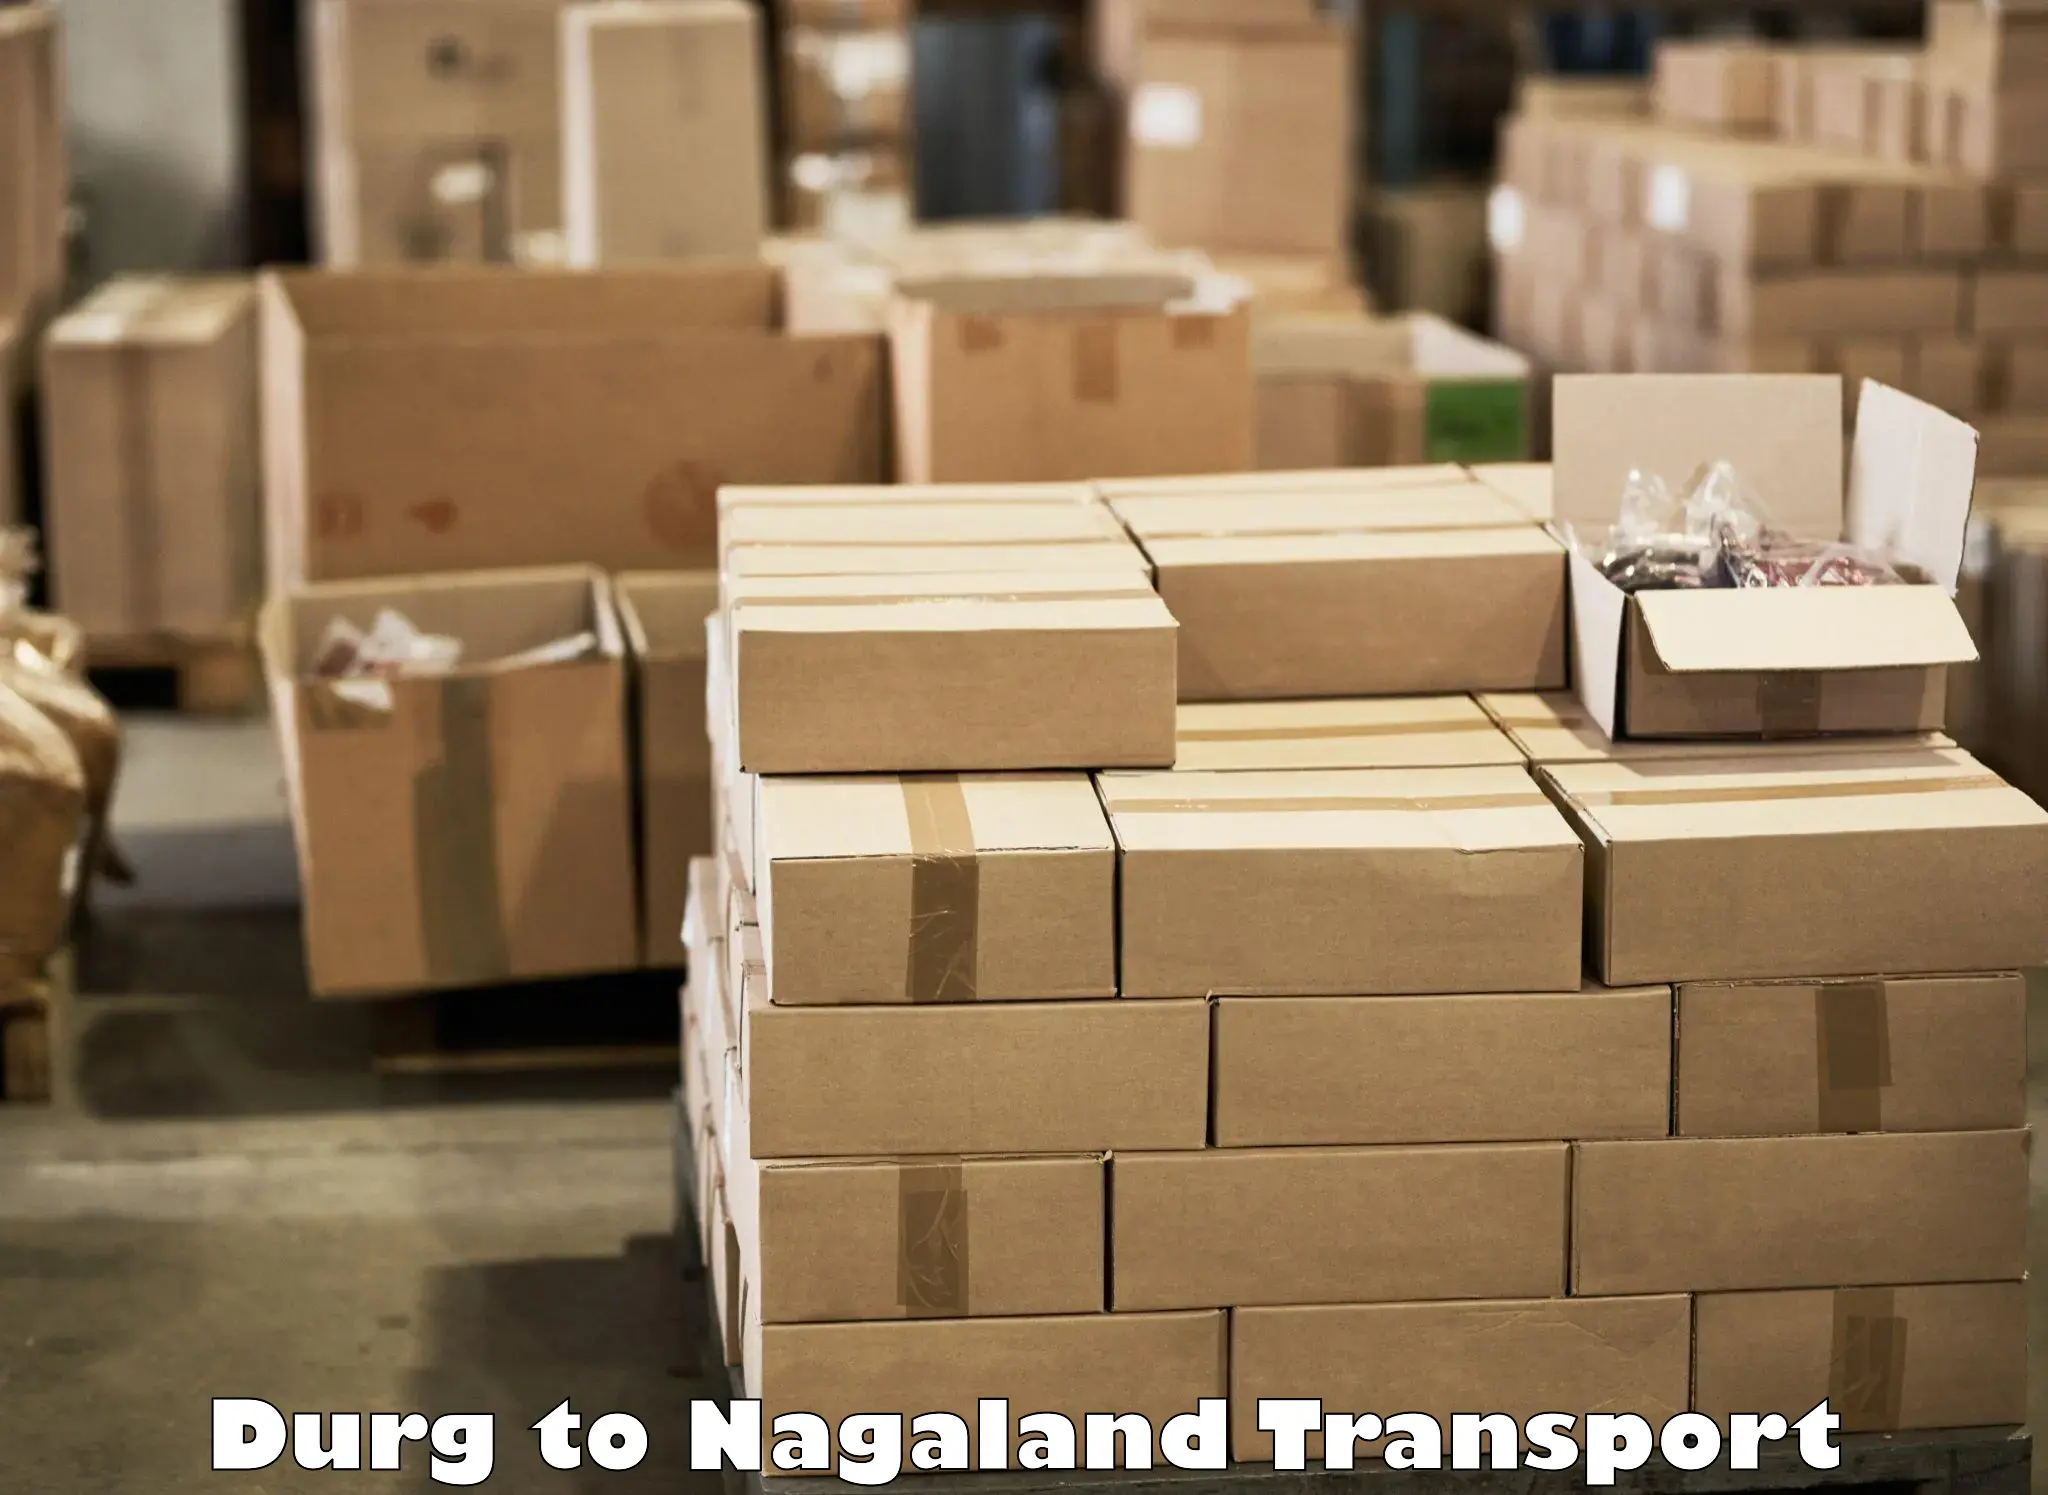 Delivery service Durg to Nagaland